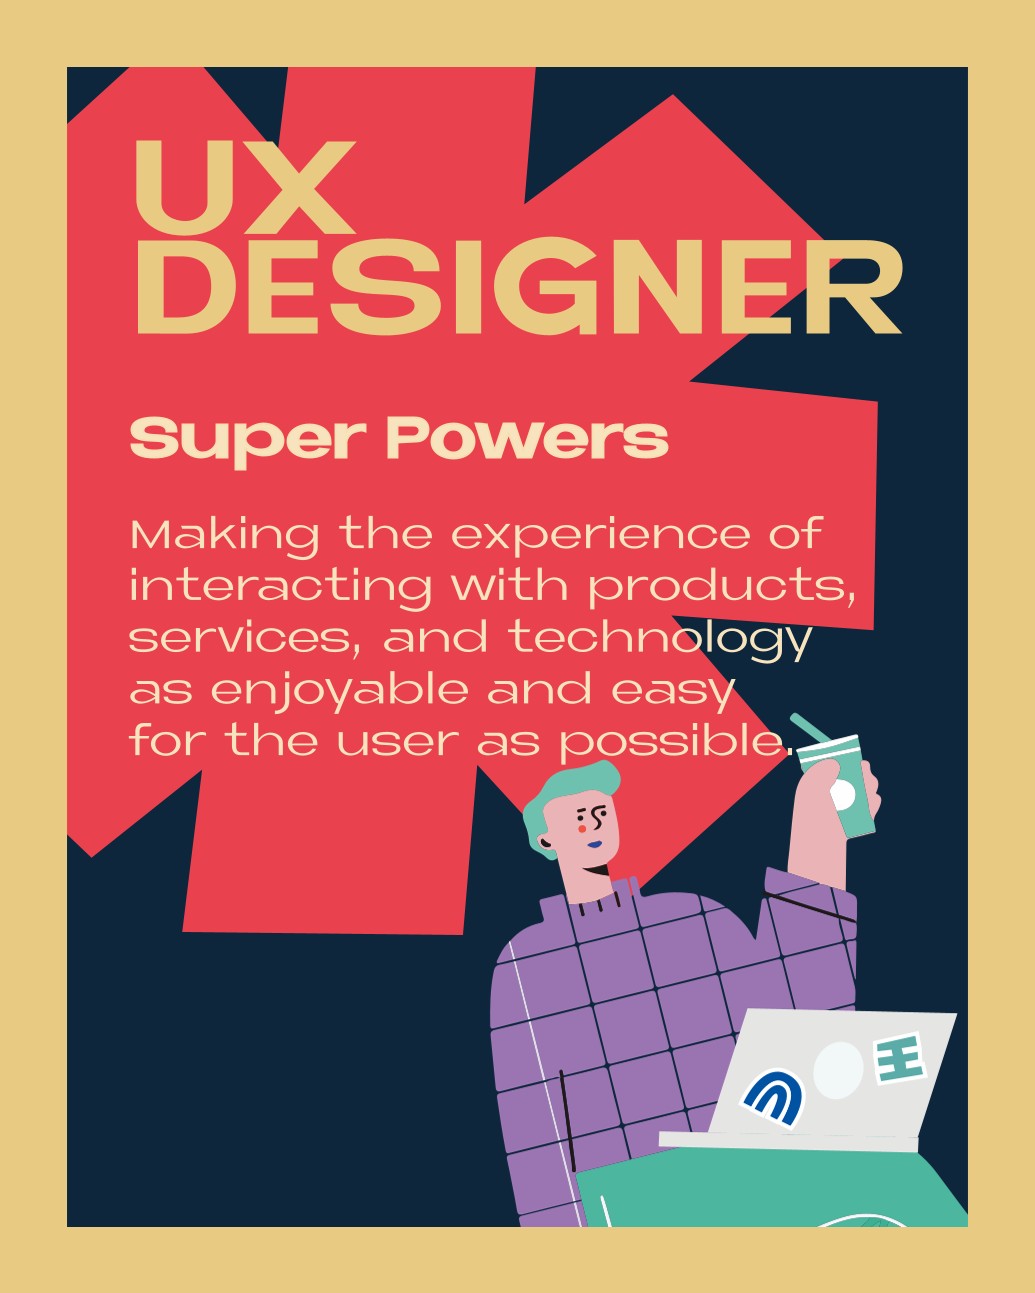 UX DESIGNER – Super Powers: Making the experience of interacting with products, services, and technology as enjoyable and easy for the user as possible.